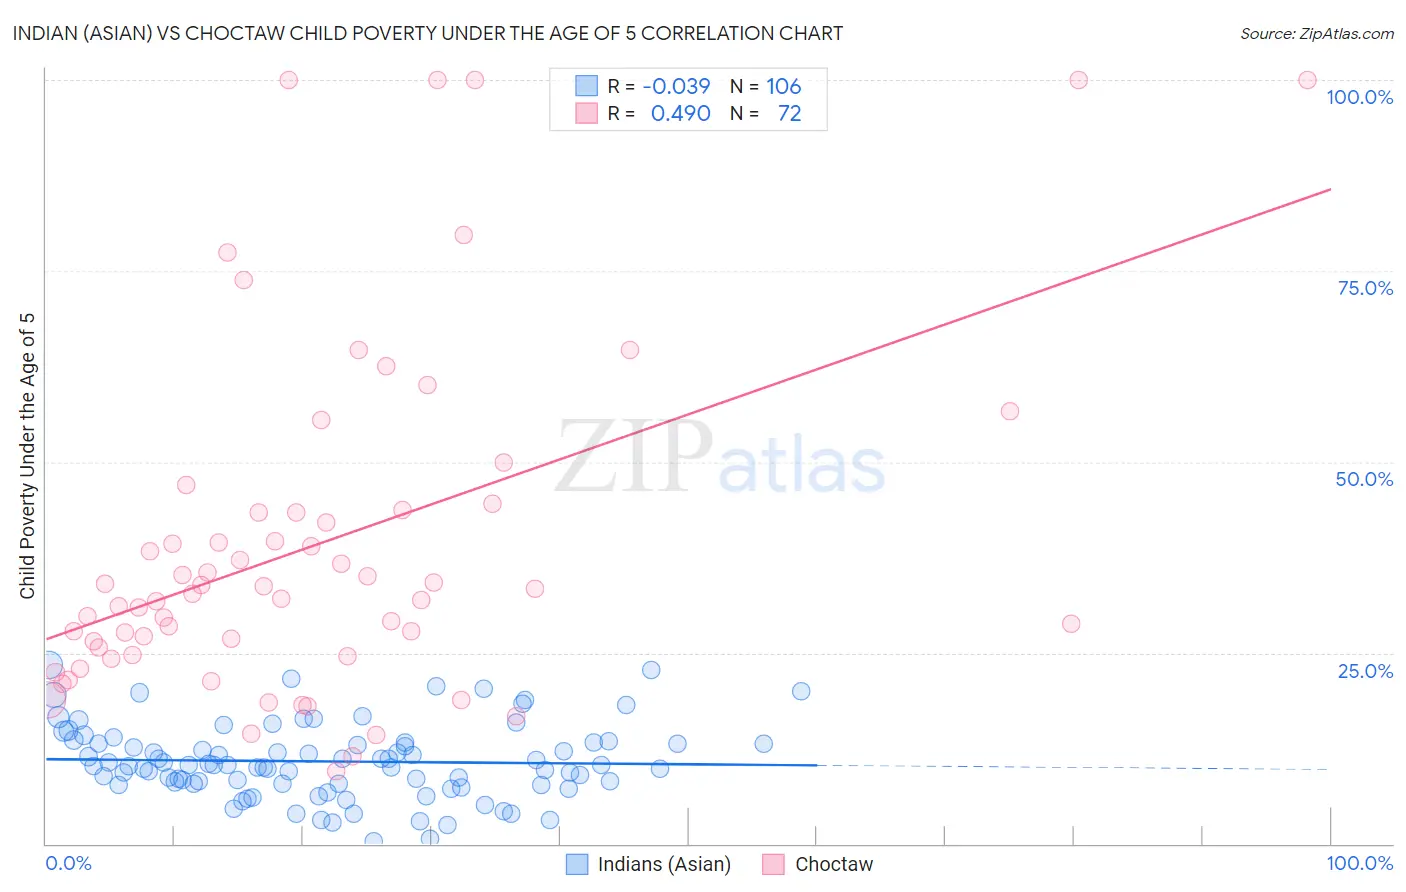 Indian (Asian) vs Choctaw Child Poverty Under the Age of 5